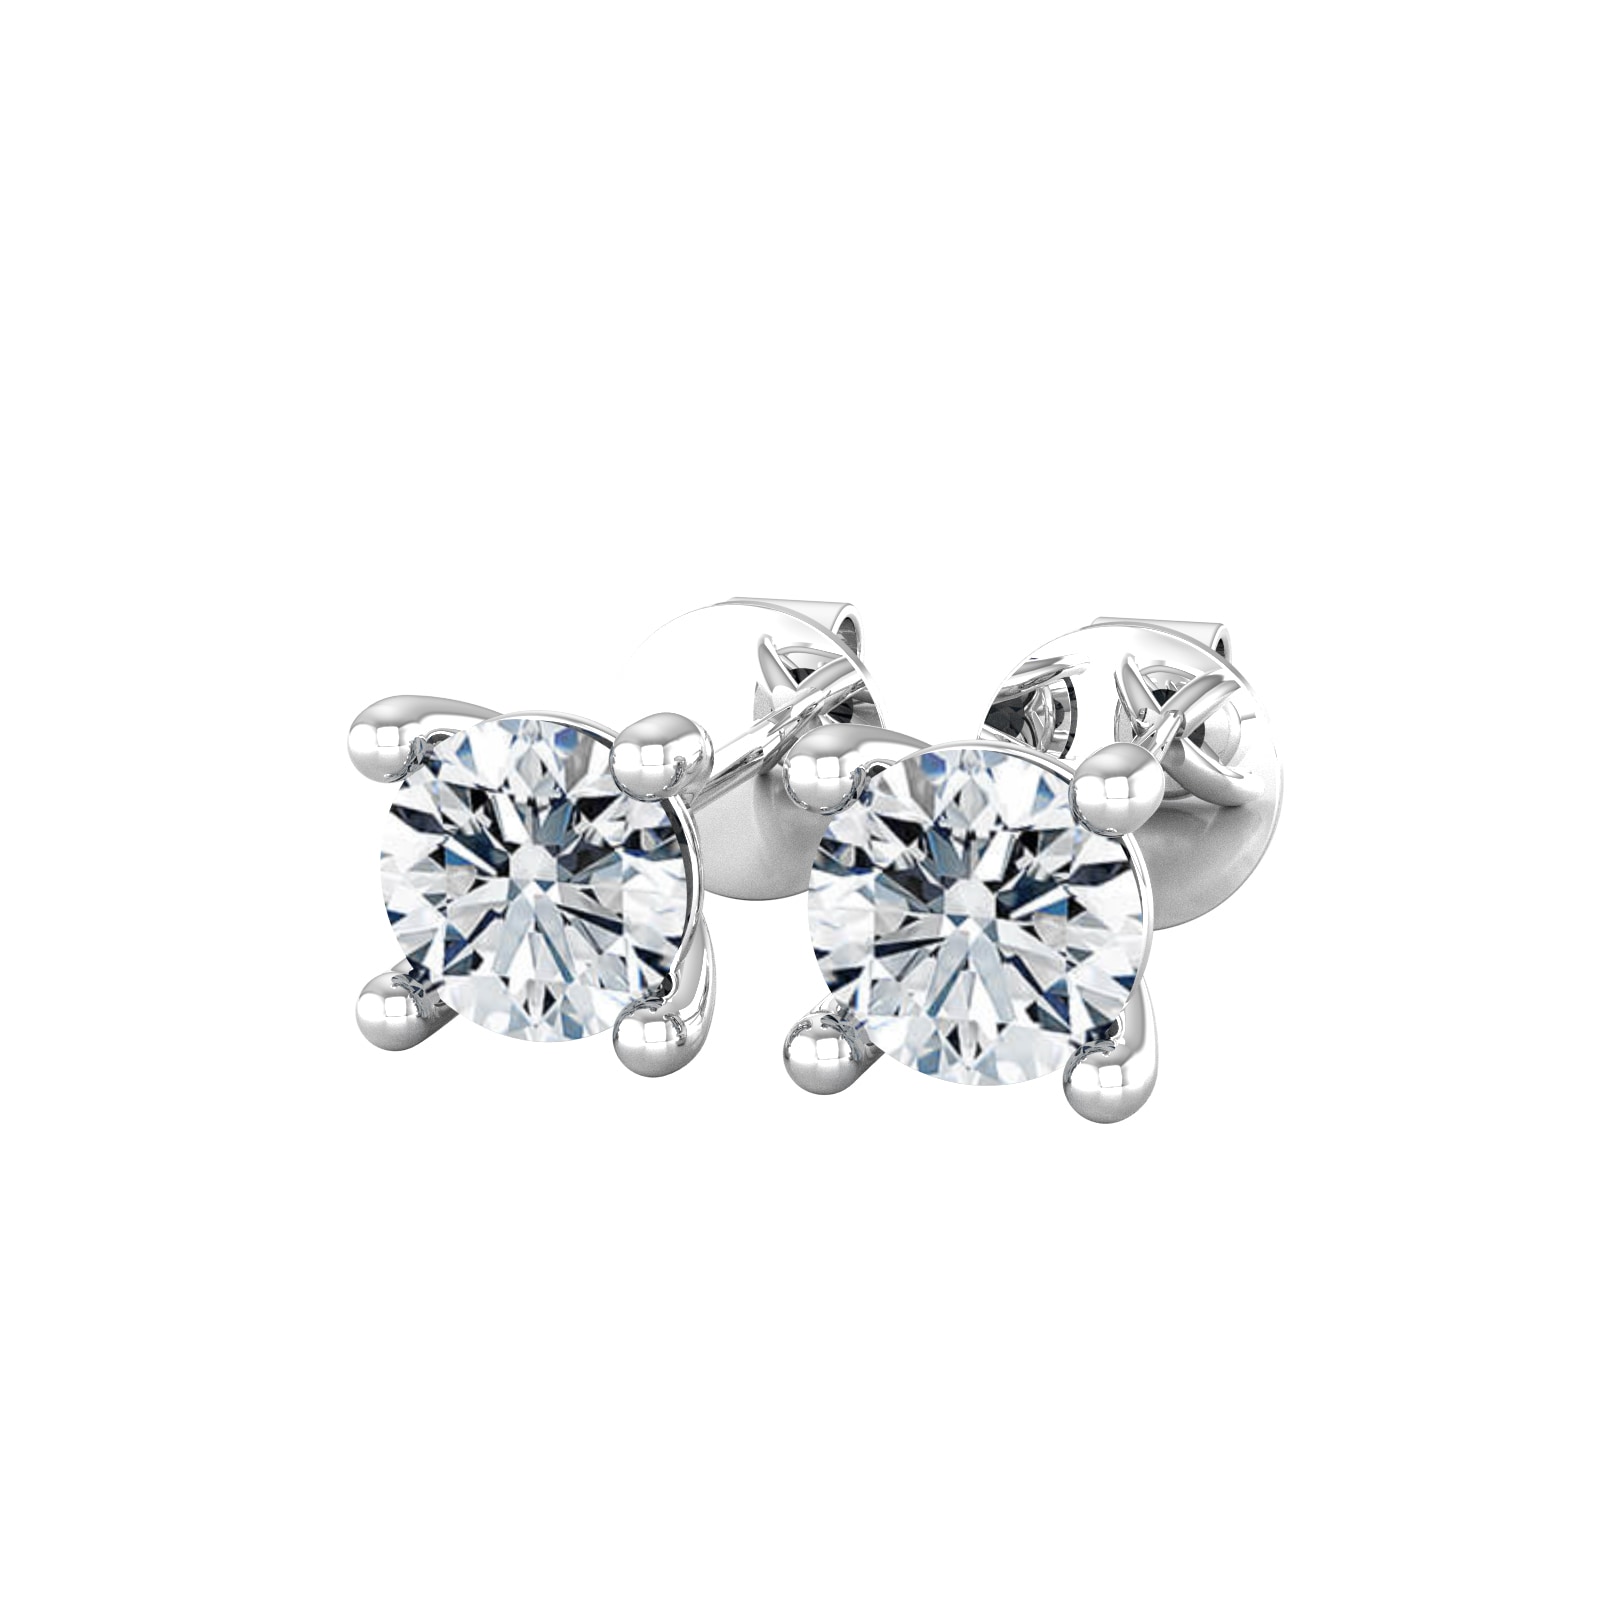 18ct White Gold 0.60cttw Solitaire Diamond Stud Earrings